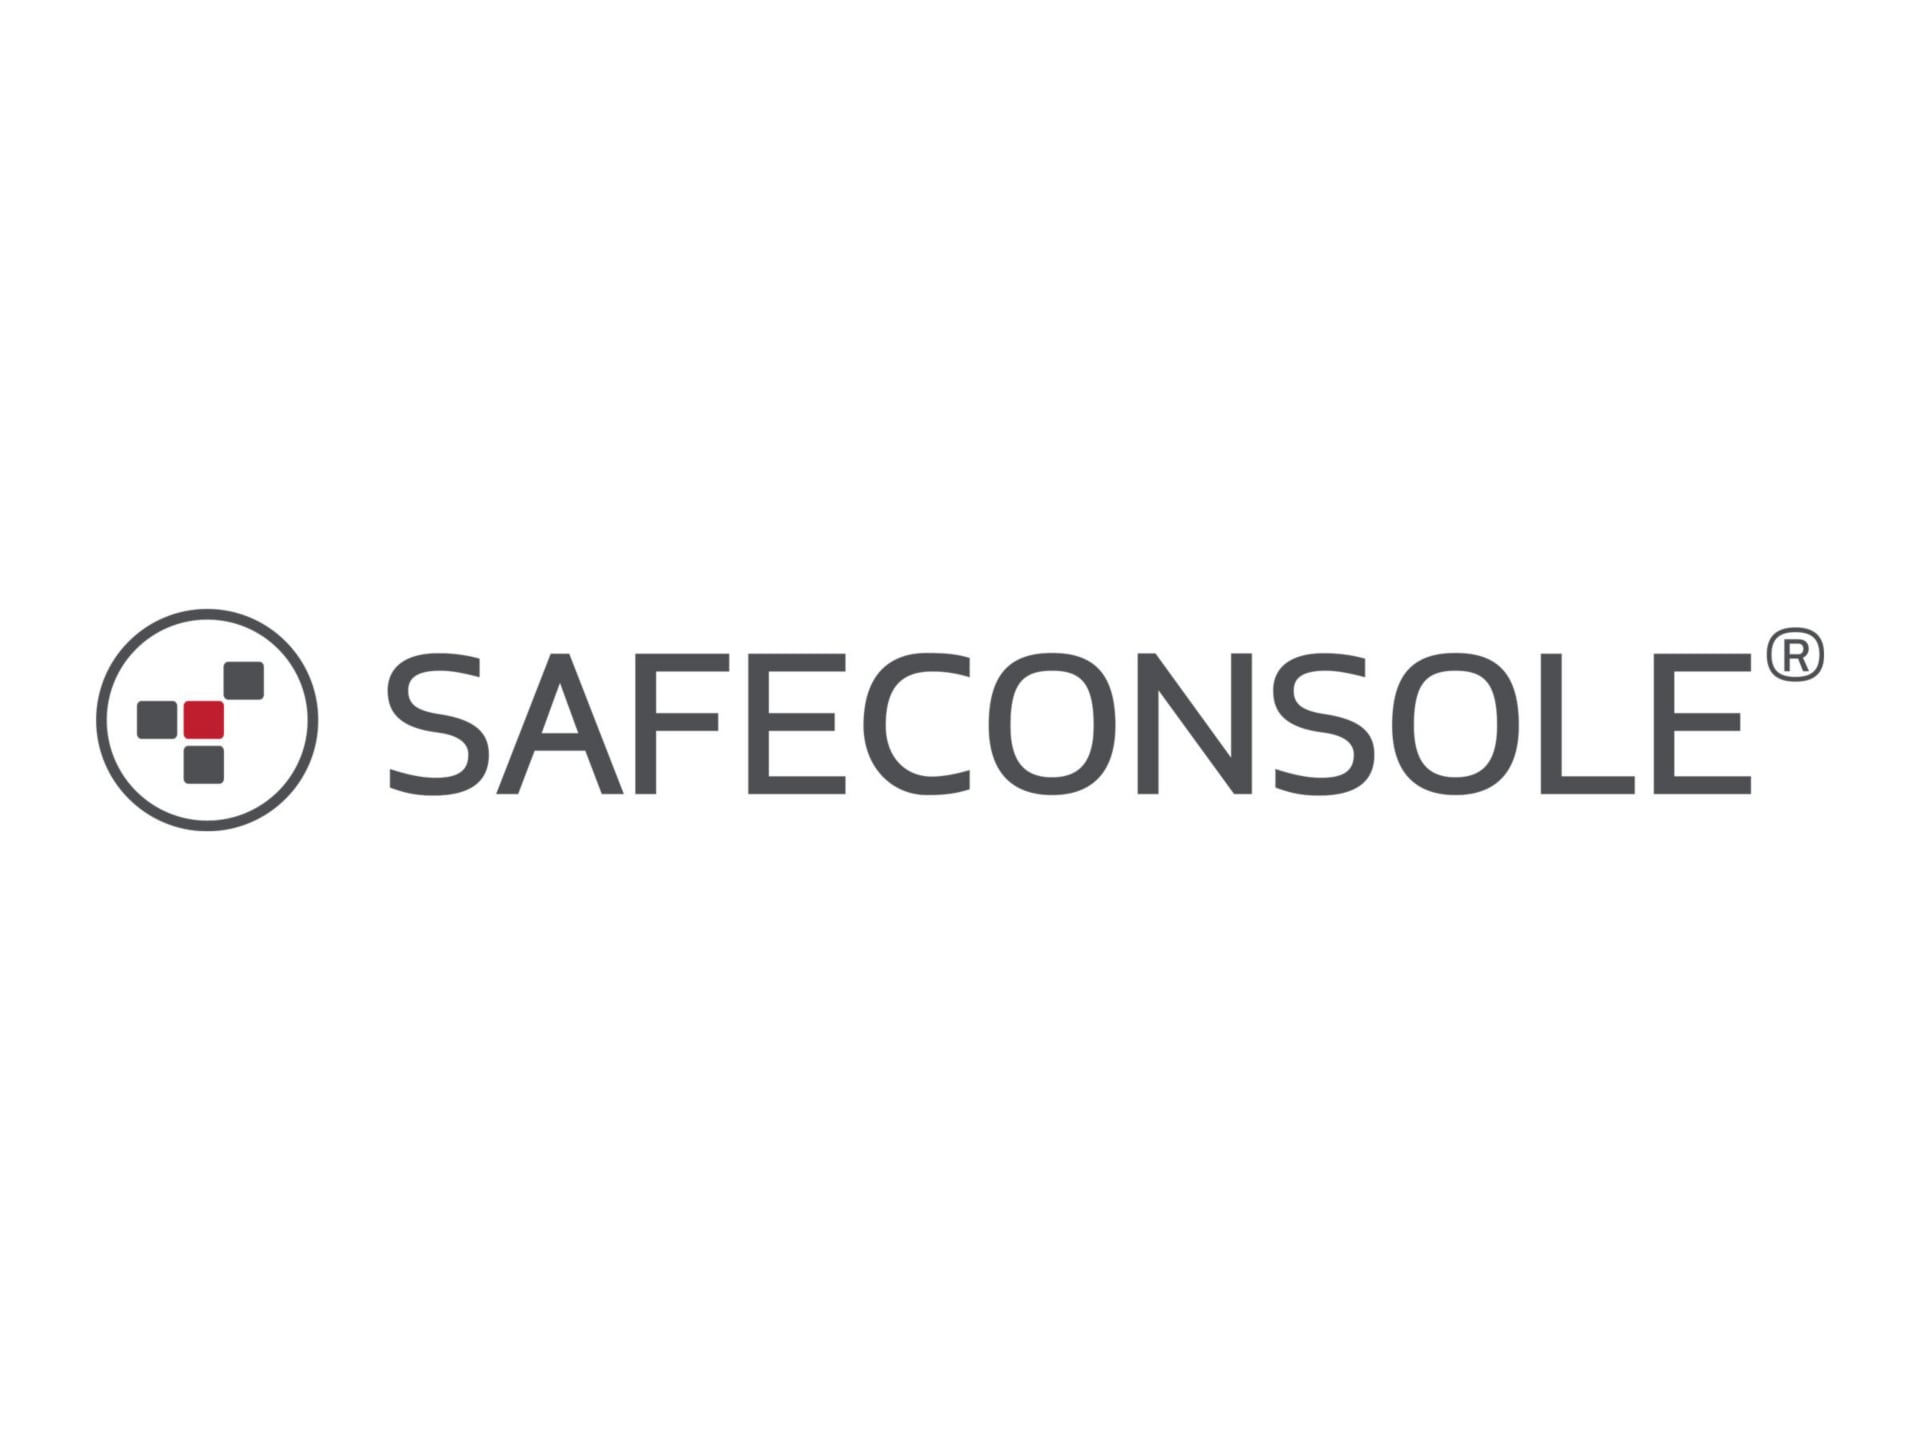 SafeConsole Cloud - Device License (3 years) - 1 license